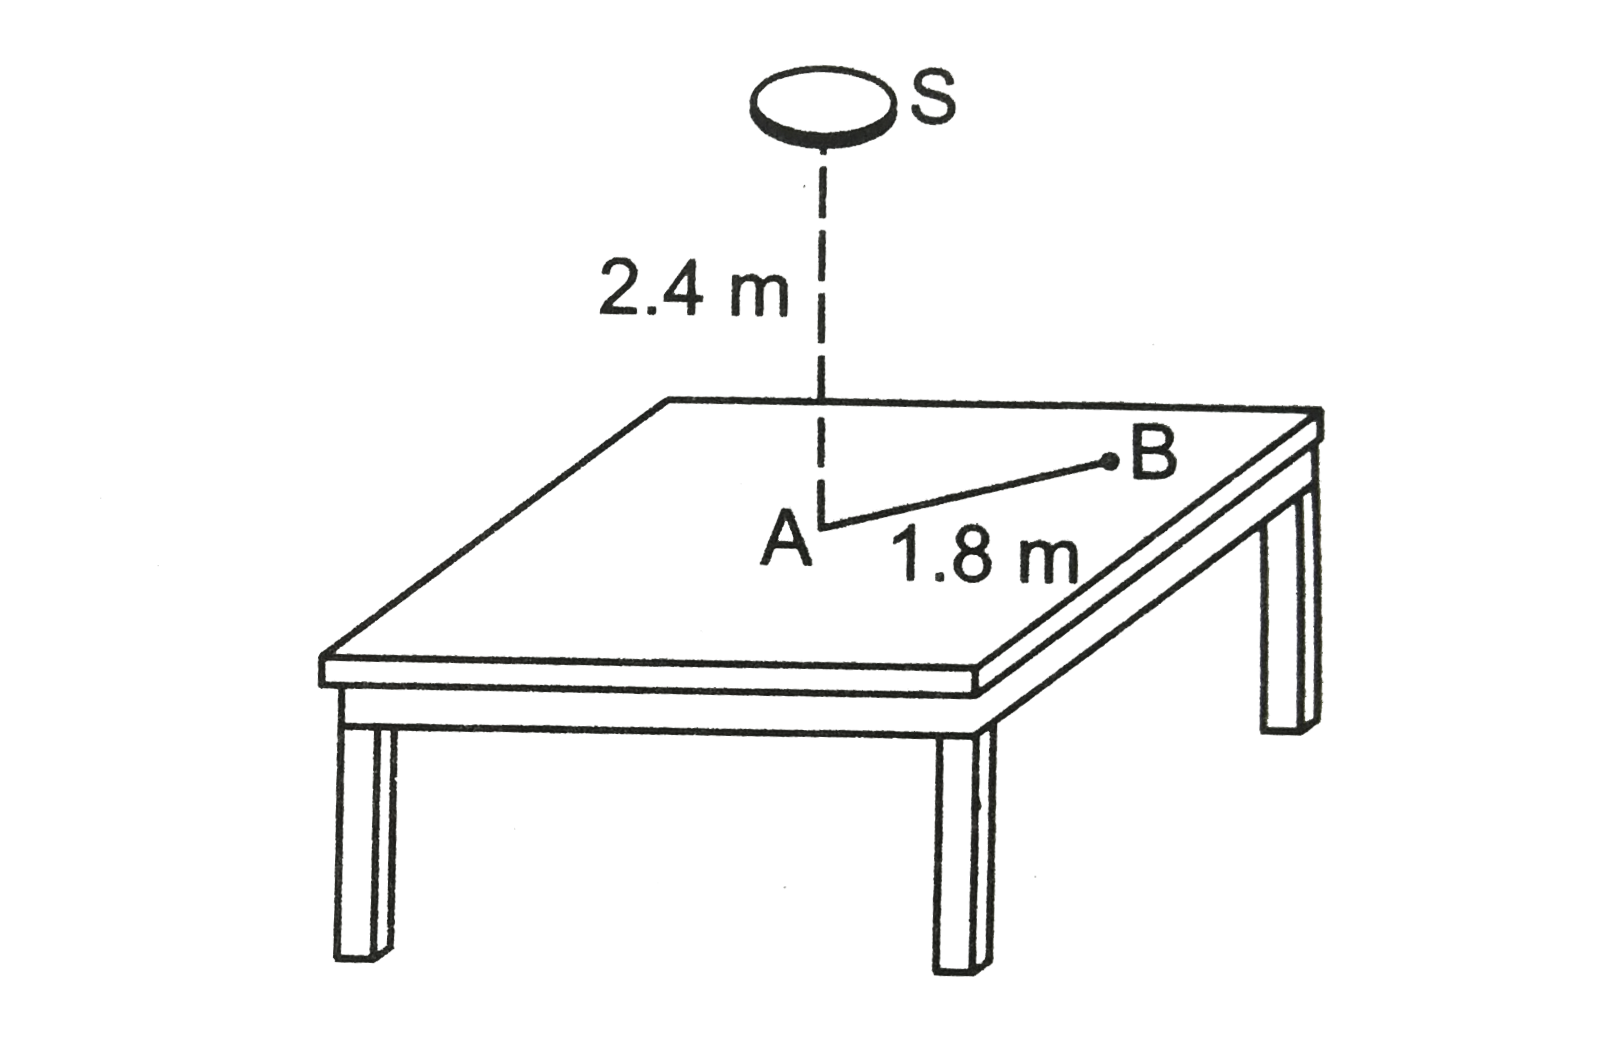 Figure shows a small diffused plane source S placed over a horizontal table-top at a distance of 2.4 m with its plane parallel to the table-top. The illuminance at the point A directly below the source is 25 lux. Find the illuminance at a point B of the table at a distance of 1.8 m from A.